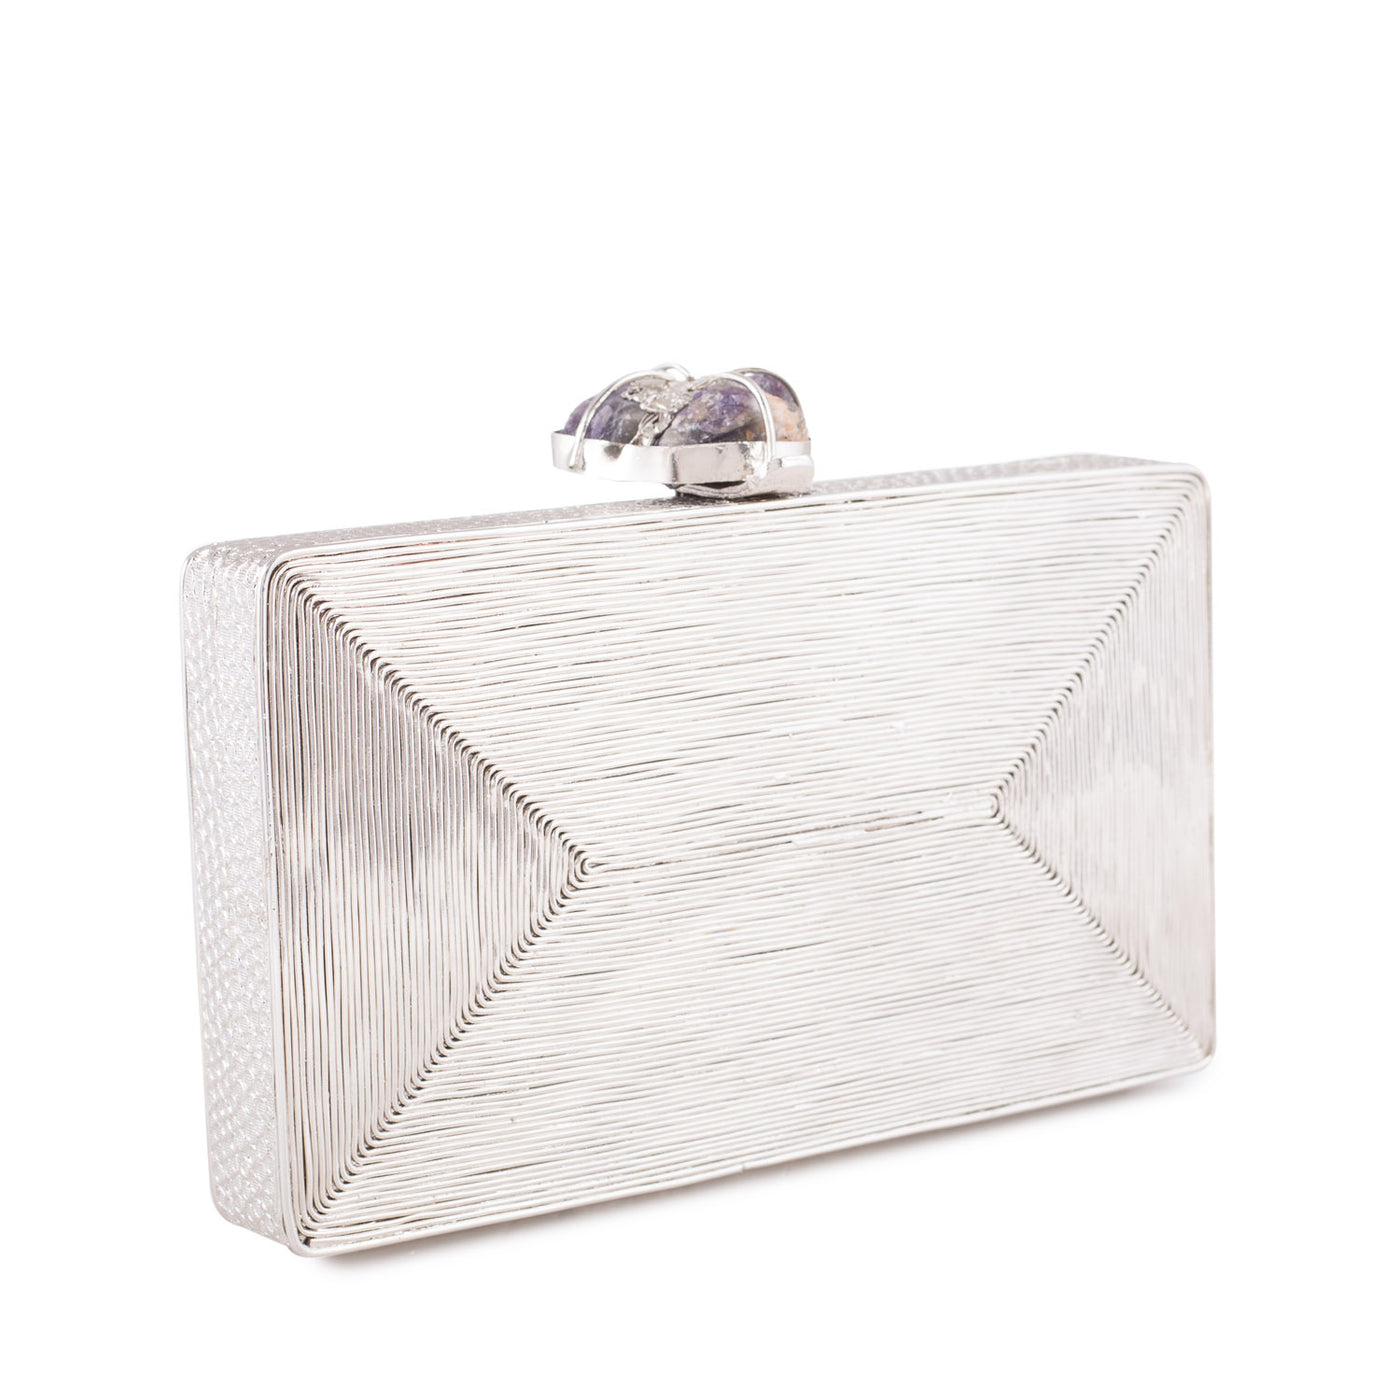 Lines Silver Clutch - Reversible clutch bag for women